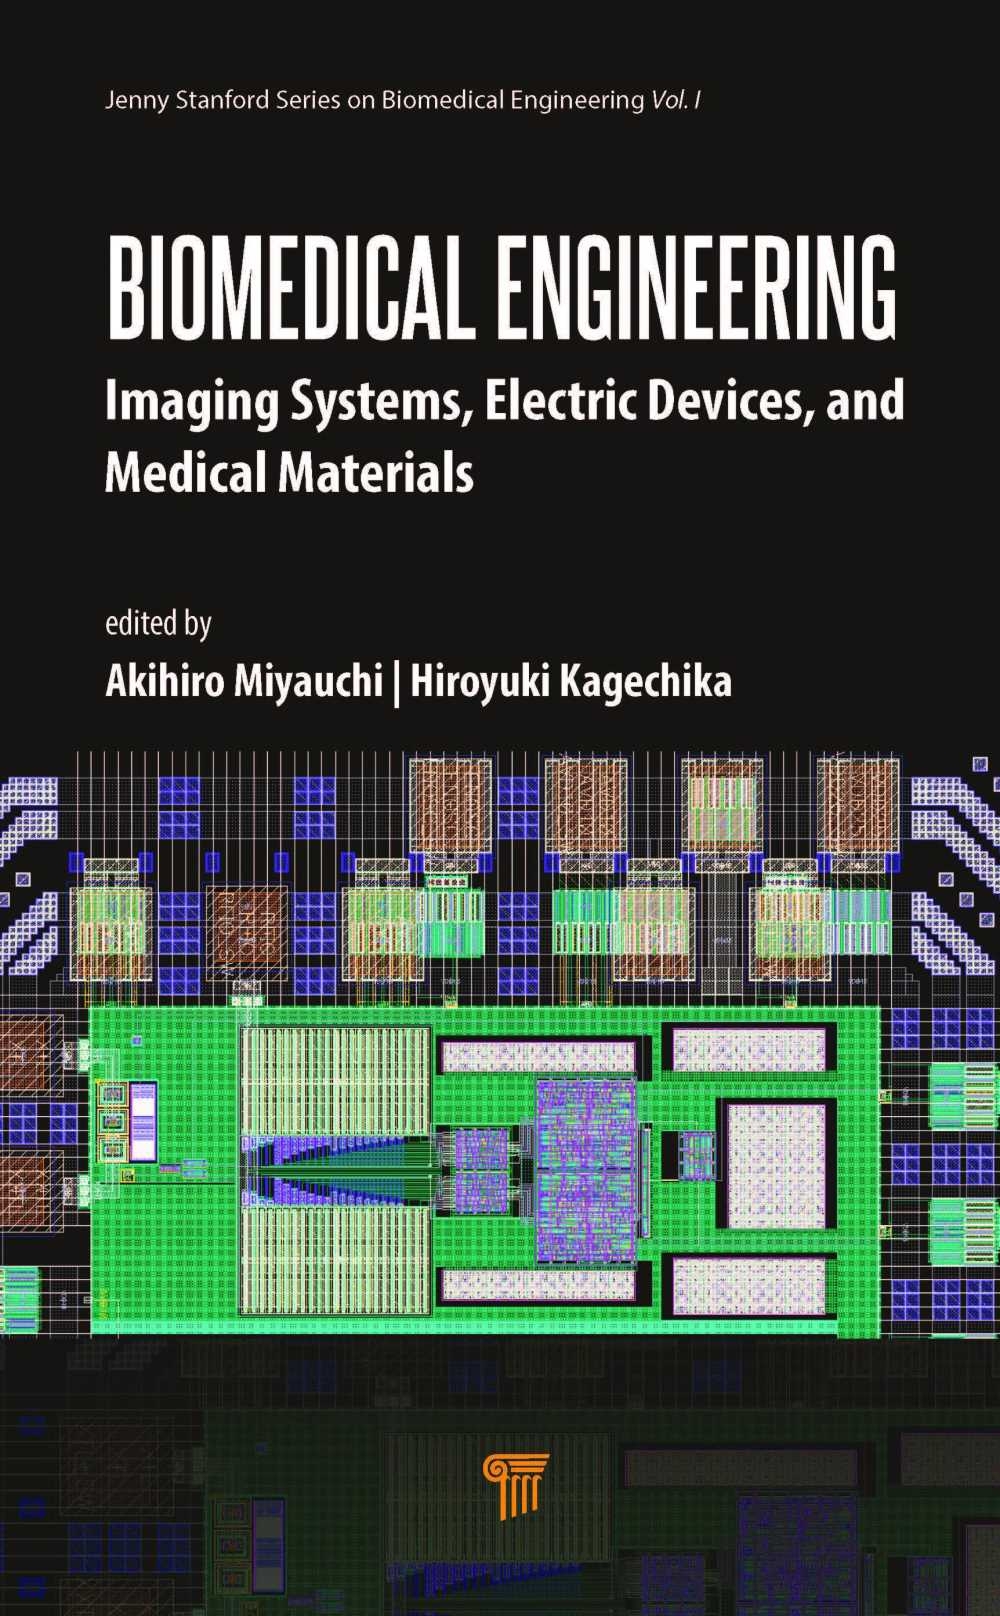 Biomedical Engineering: Imaging Systems, Electric Devices, and Medical Materials